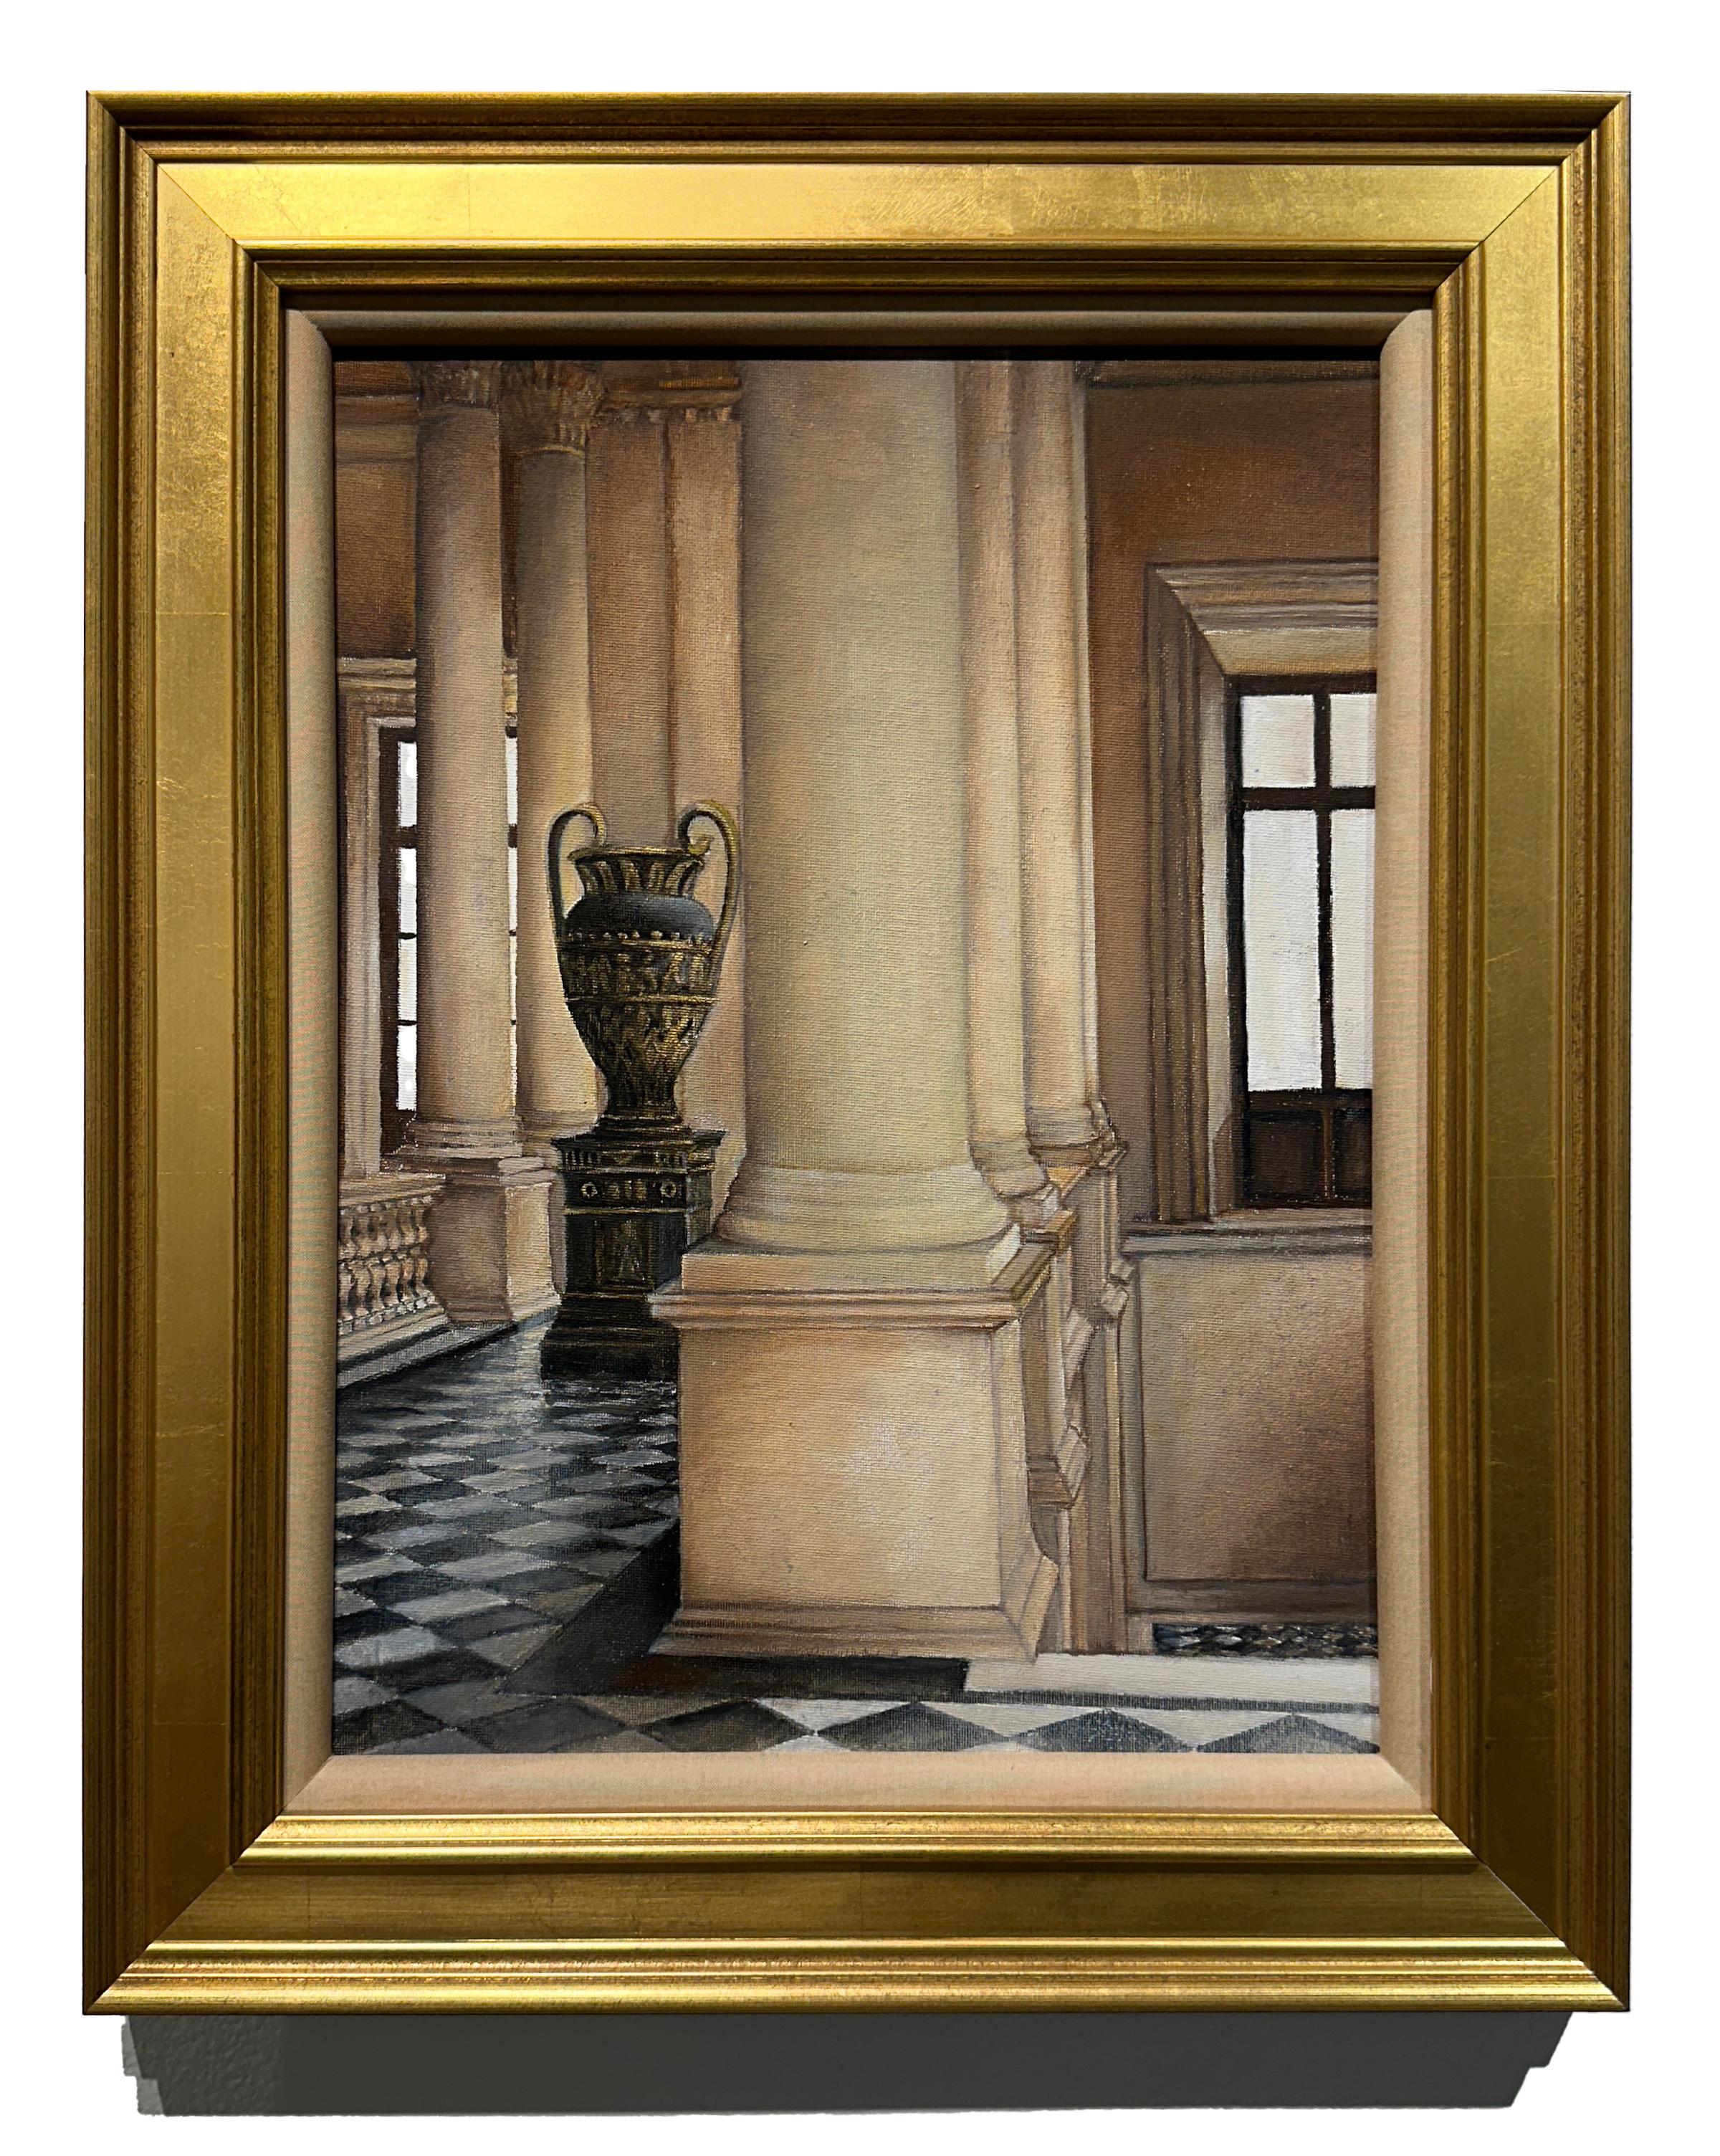 The Louvre - Interior Architectural Scene, Framed, Original Oil on Canvas - Painting by Richard Gibbons